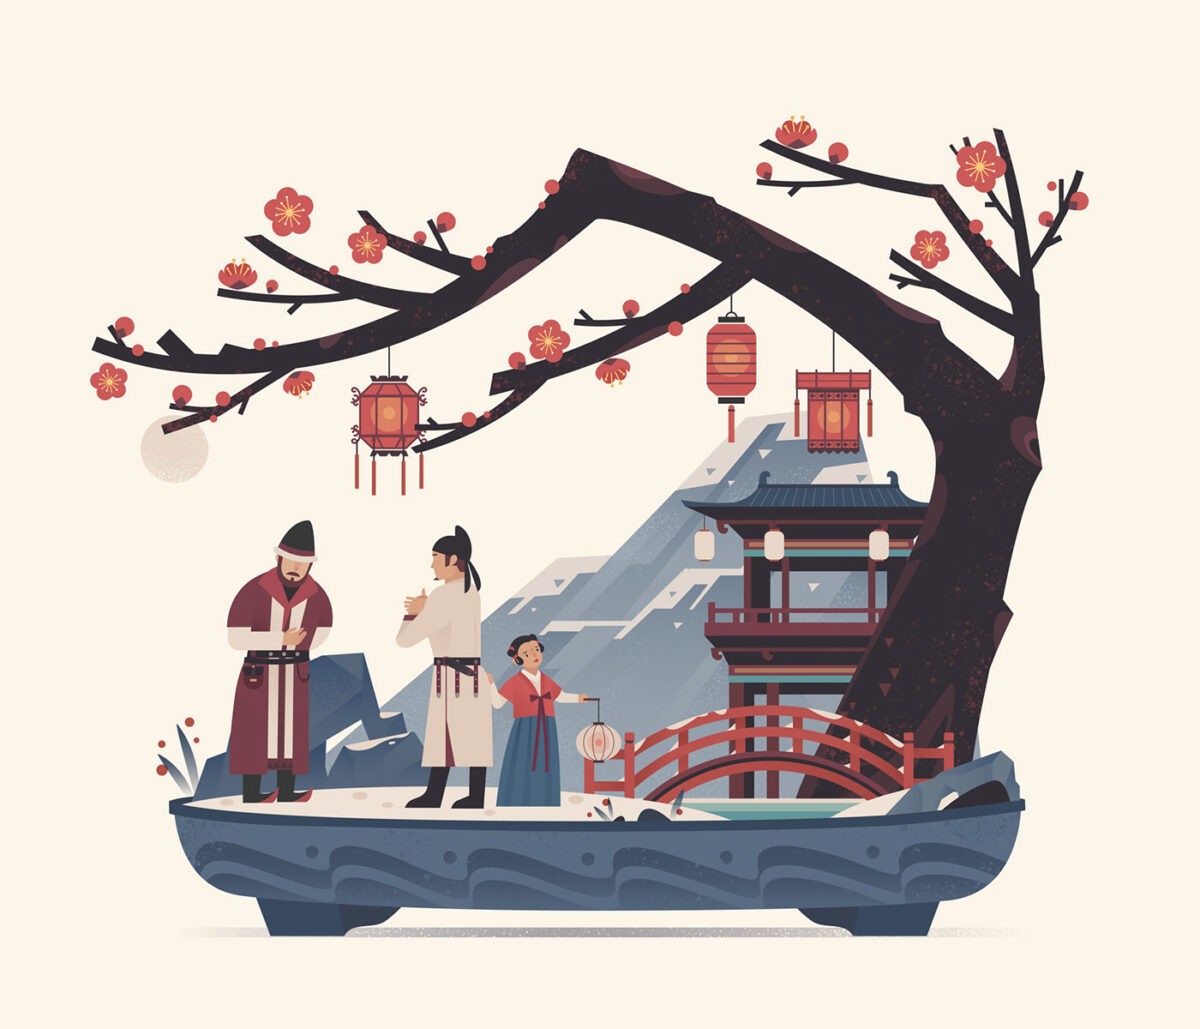 A Year Of Joy In Tang Dynasty Marvelous Illustration Series By Koma Zhang 4